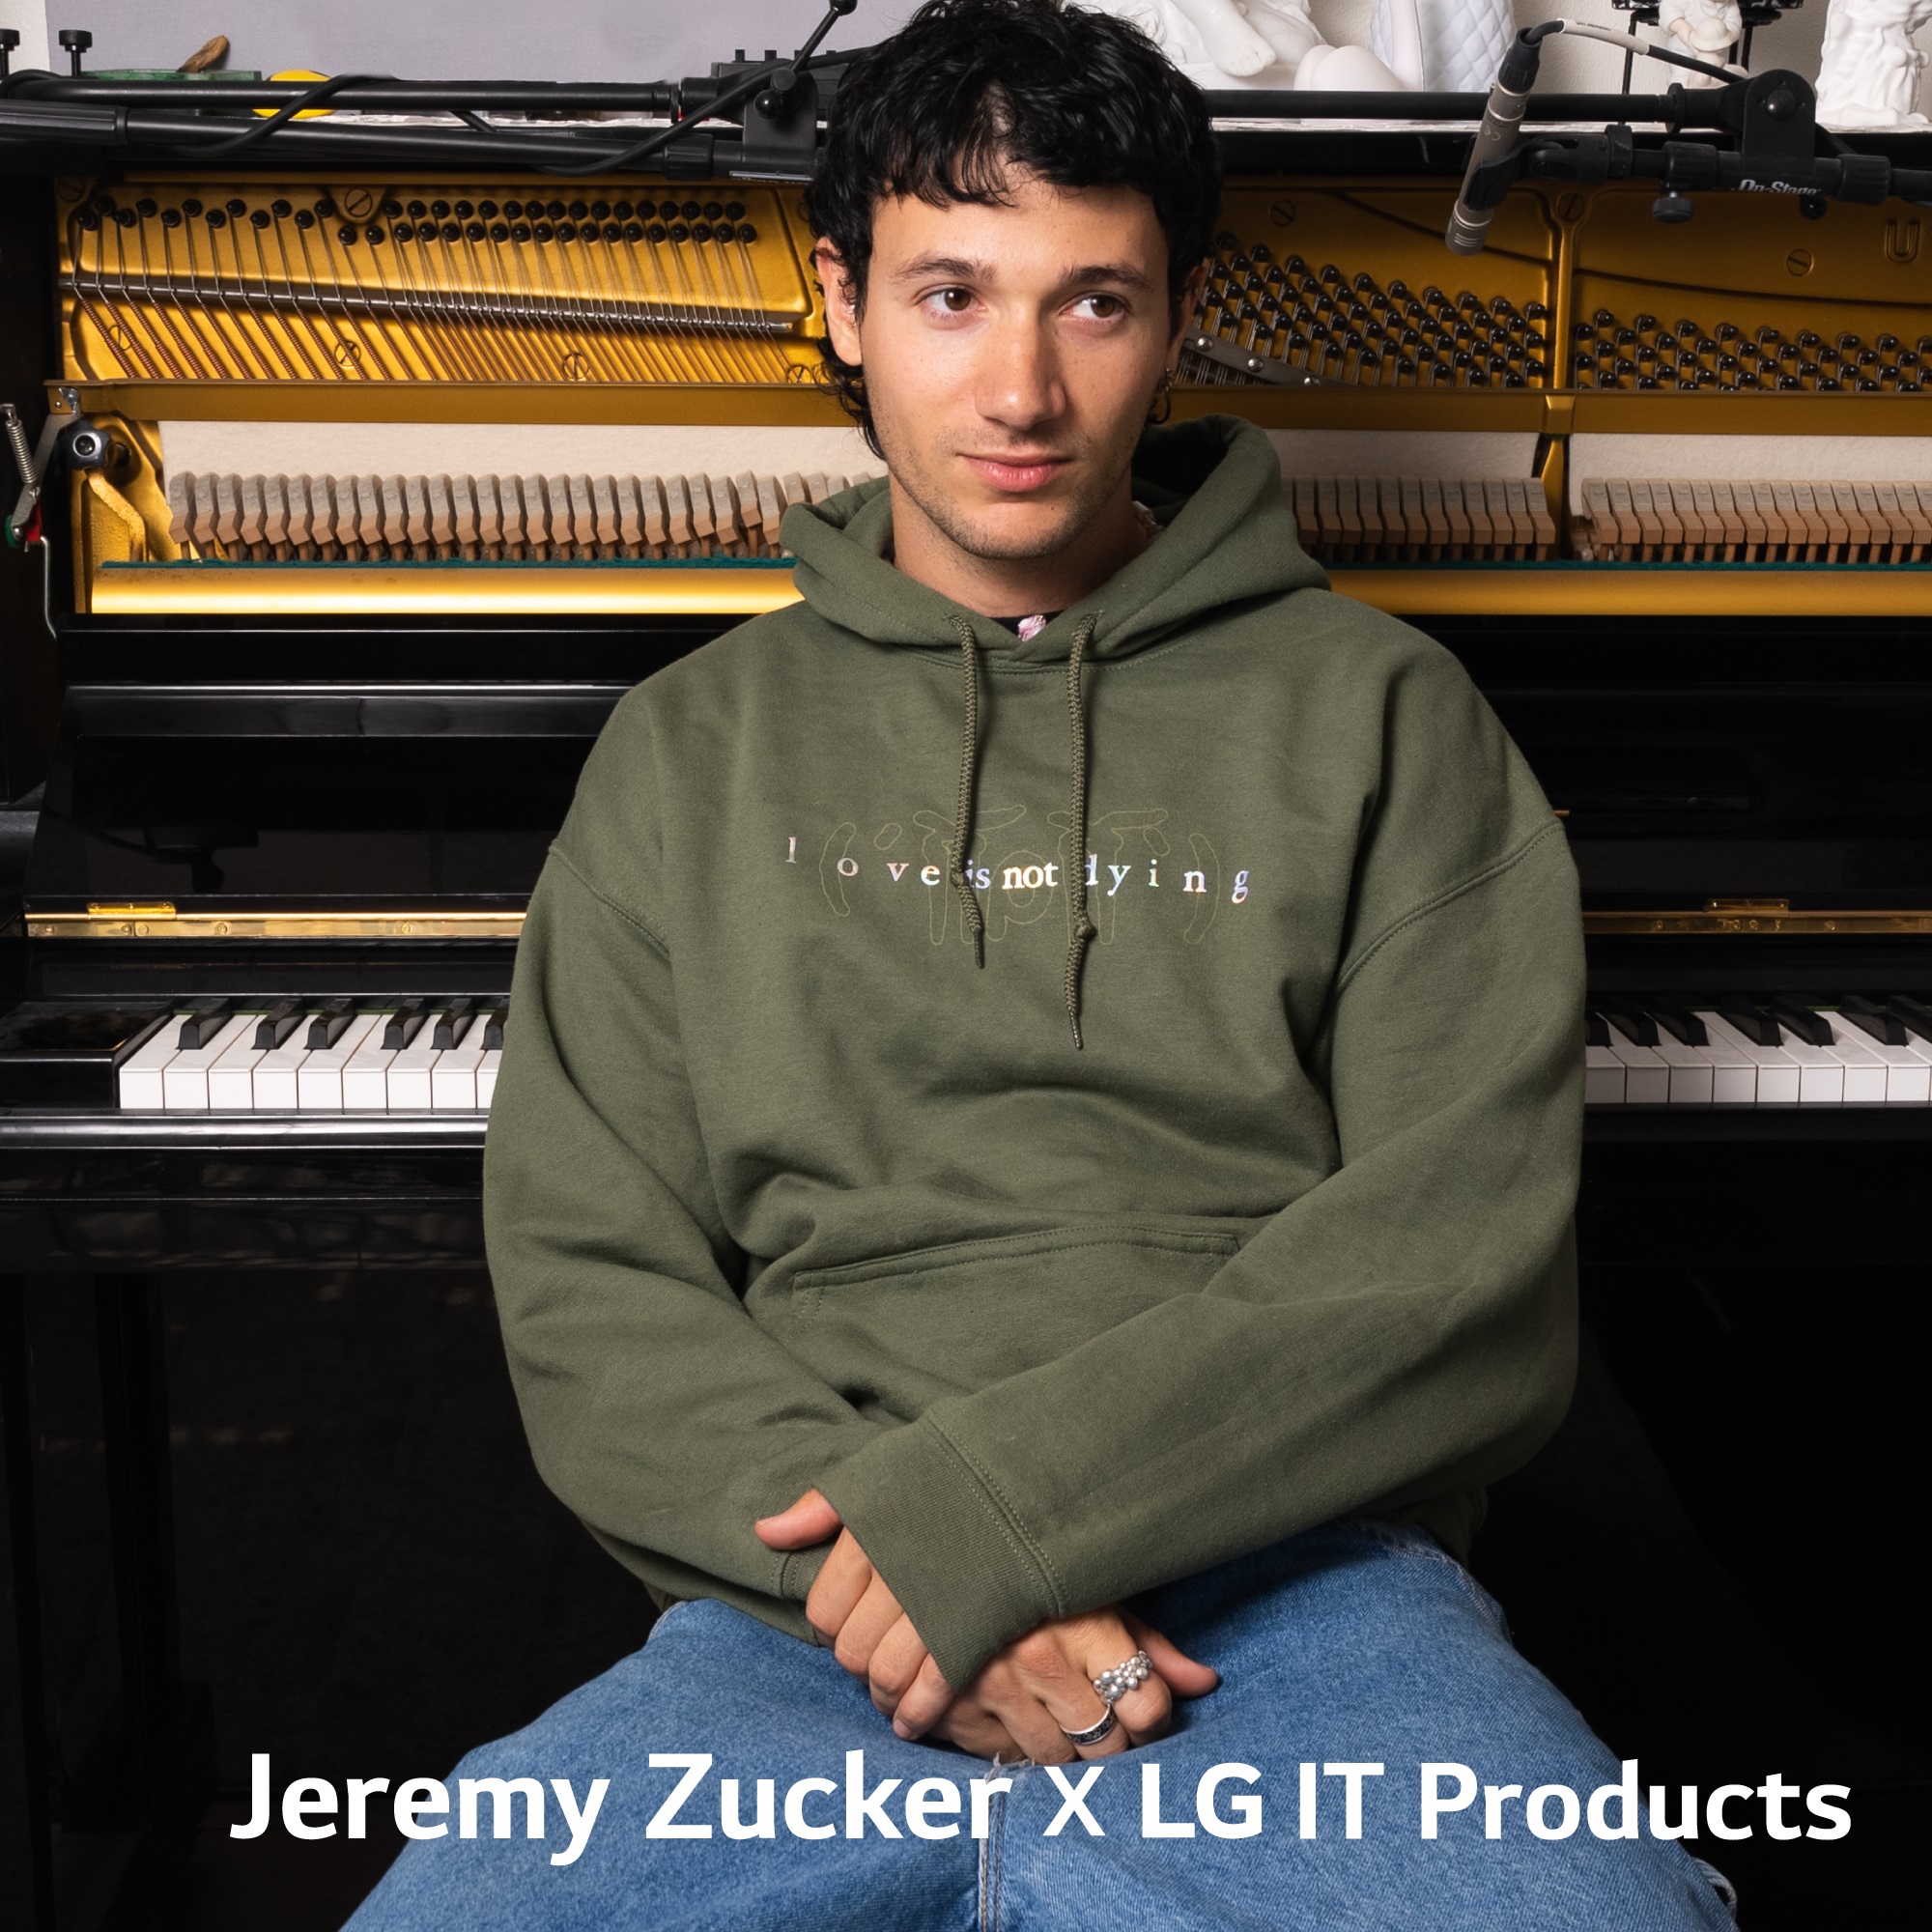 Jeremy Zucker sitting in front of the piano